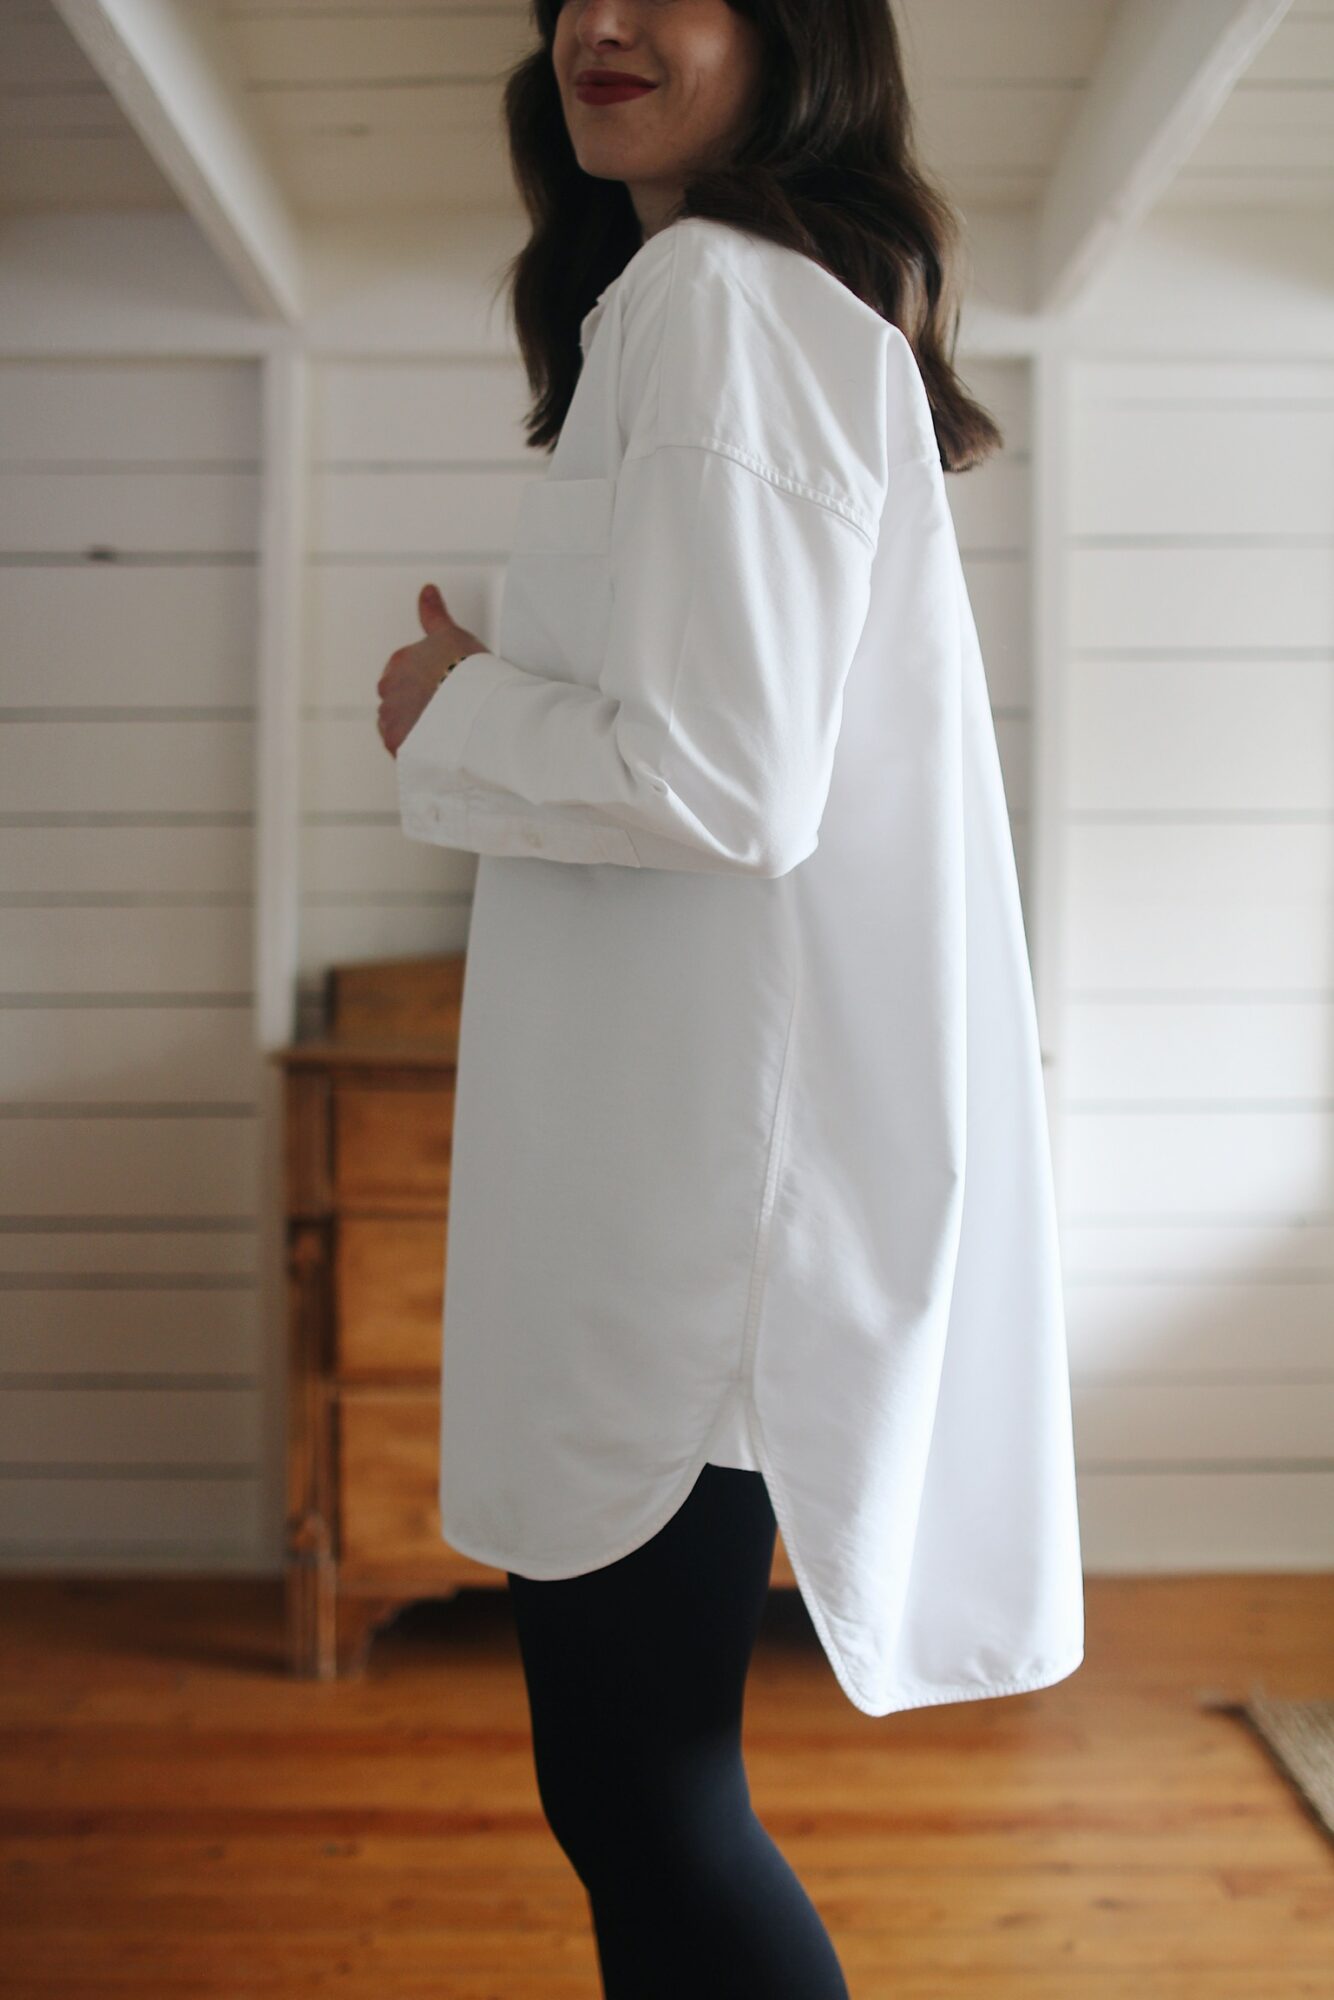 Casual outfit with oversized white shirt and black leggings